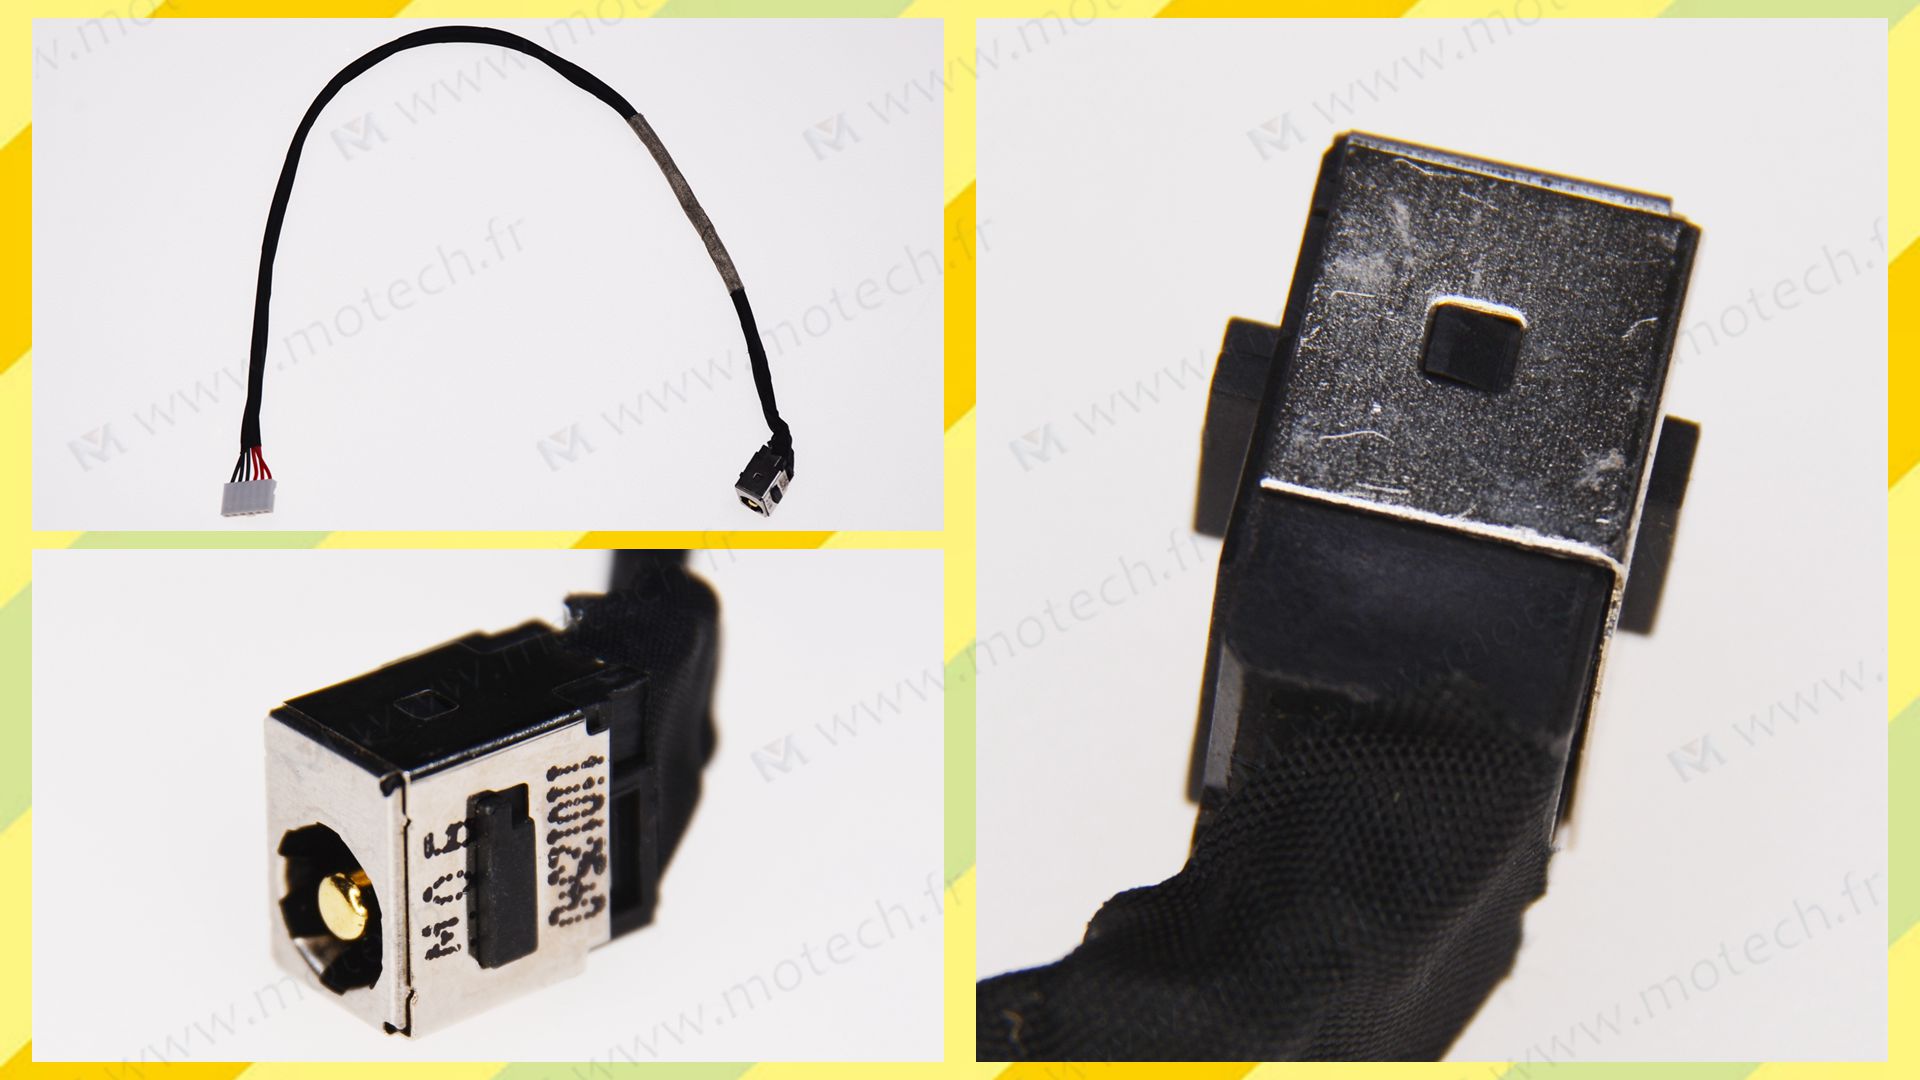 MSI CR42 charging connector, MSI CR42 DC Power Jack, MSI CR42 DC IN Cable, MSI CR42 Power Jack, MSI CR42 plug, MSI CR42 Jack socket, MSI CR42 connecteur de charge, 